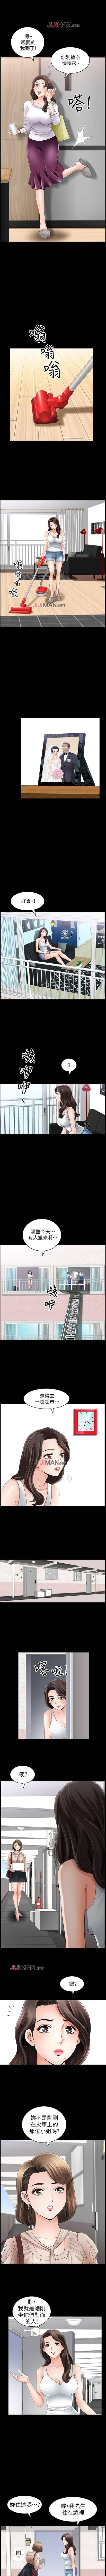 Publico 【周日连载】双妻生活（作者：skyso） 第1~23话 Two - Page 8